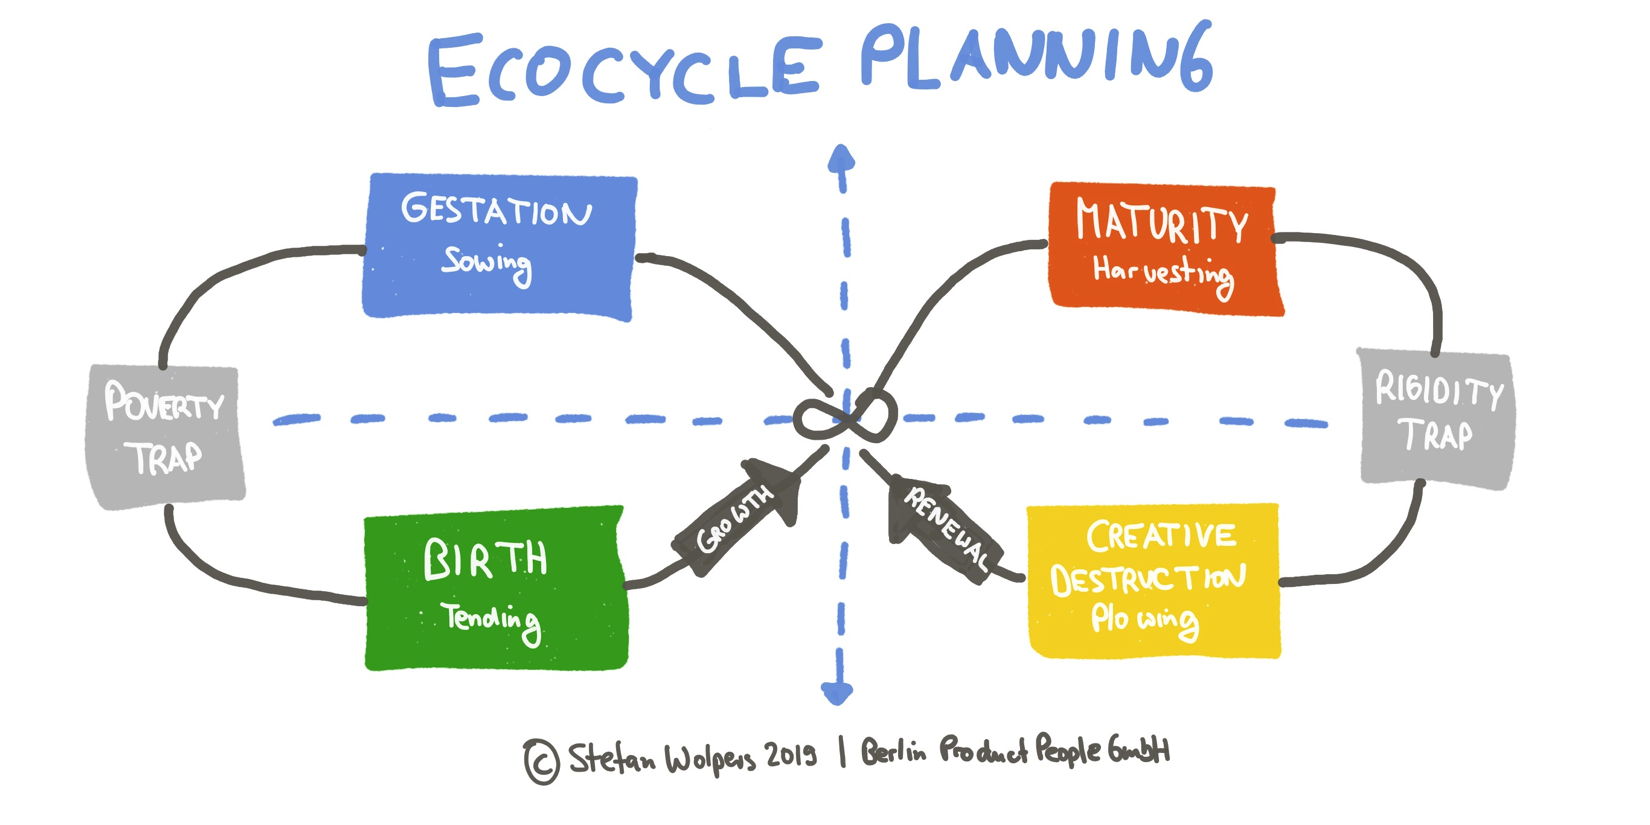 The ProductB acklog & Ecocylce Planning